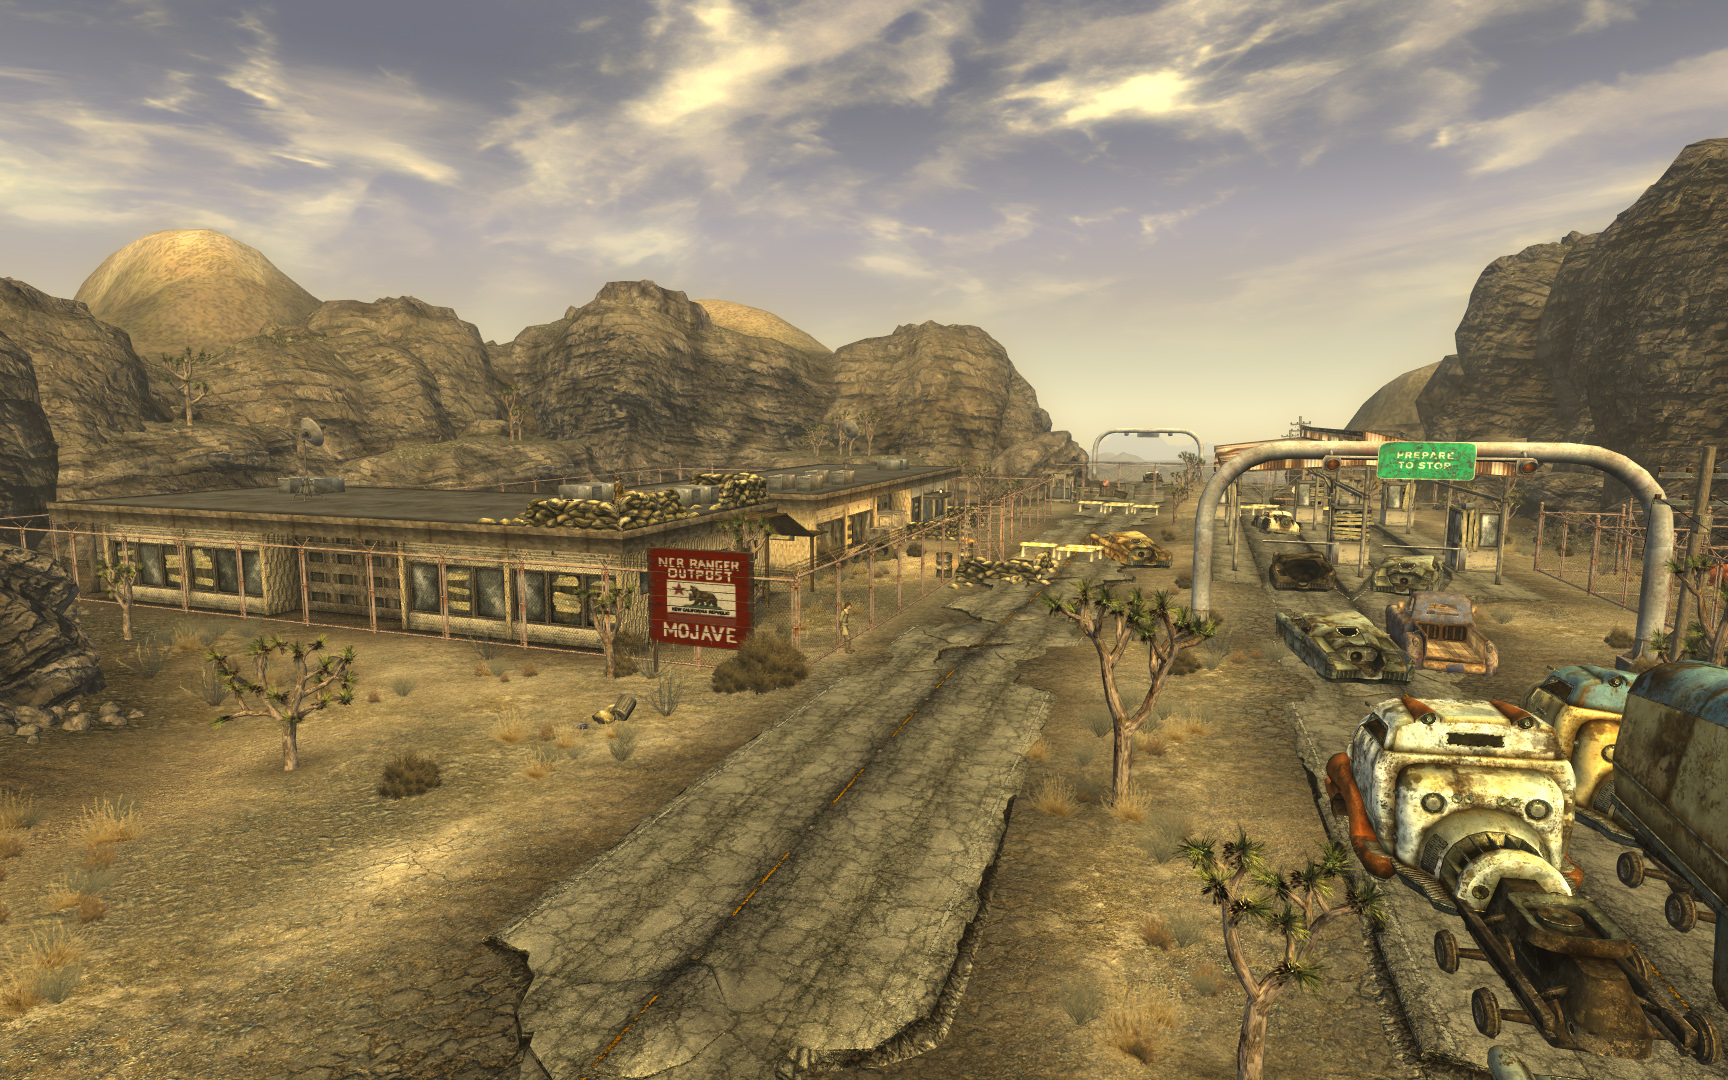 fallout new vegas map compared to real